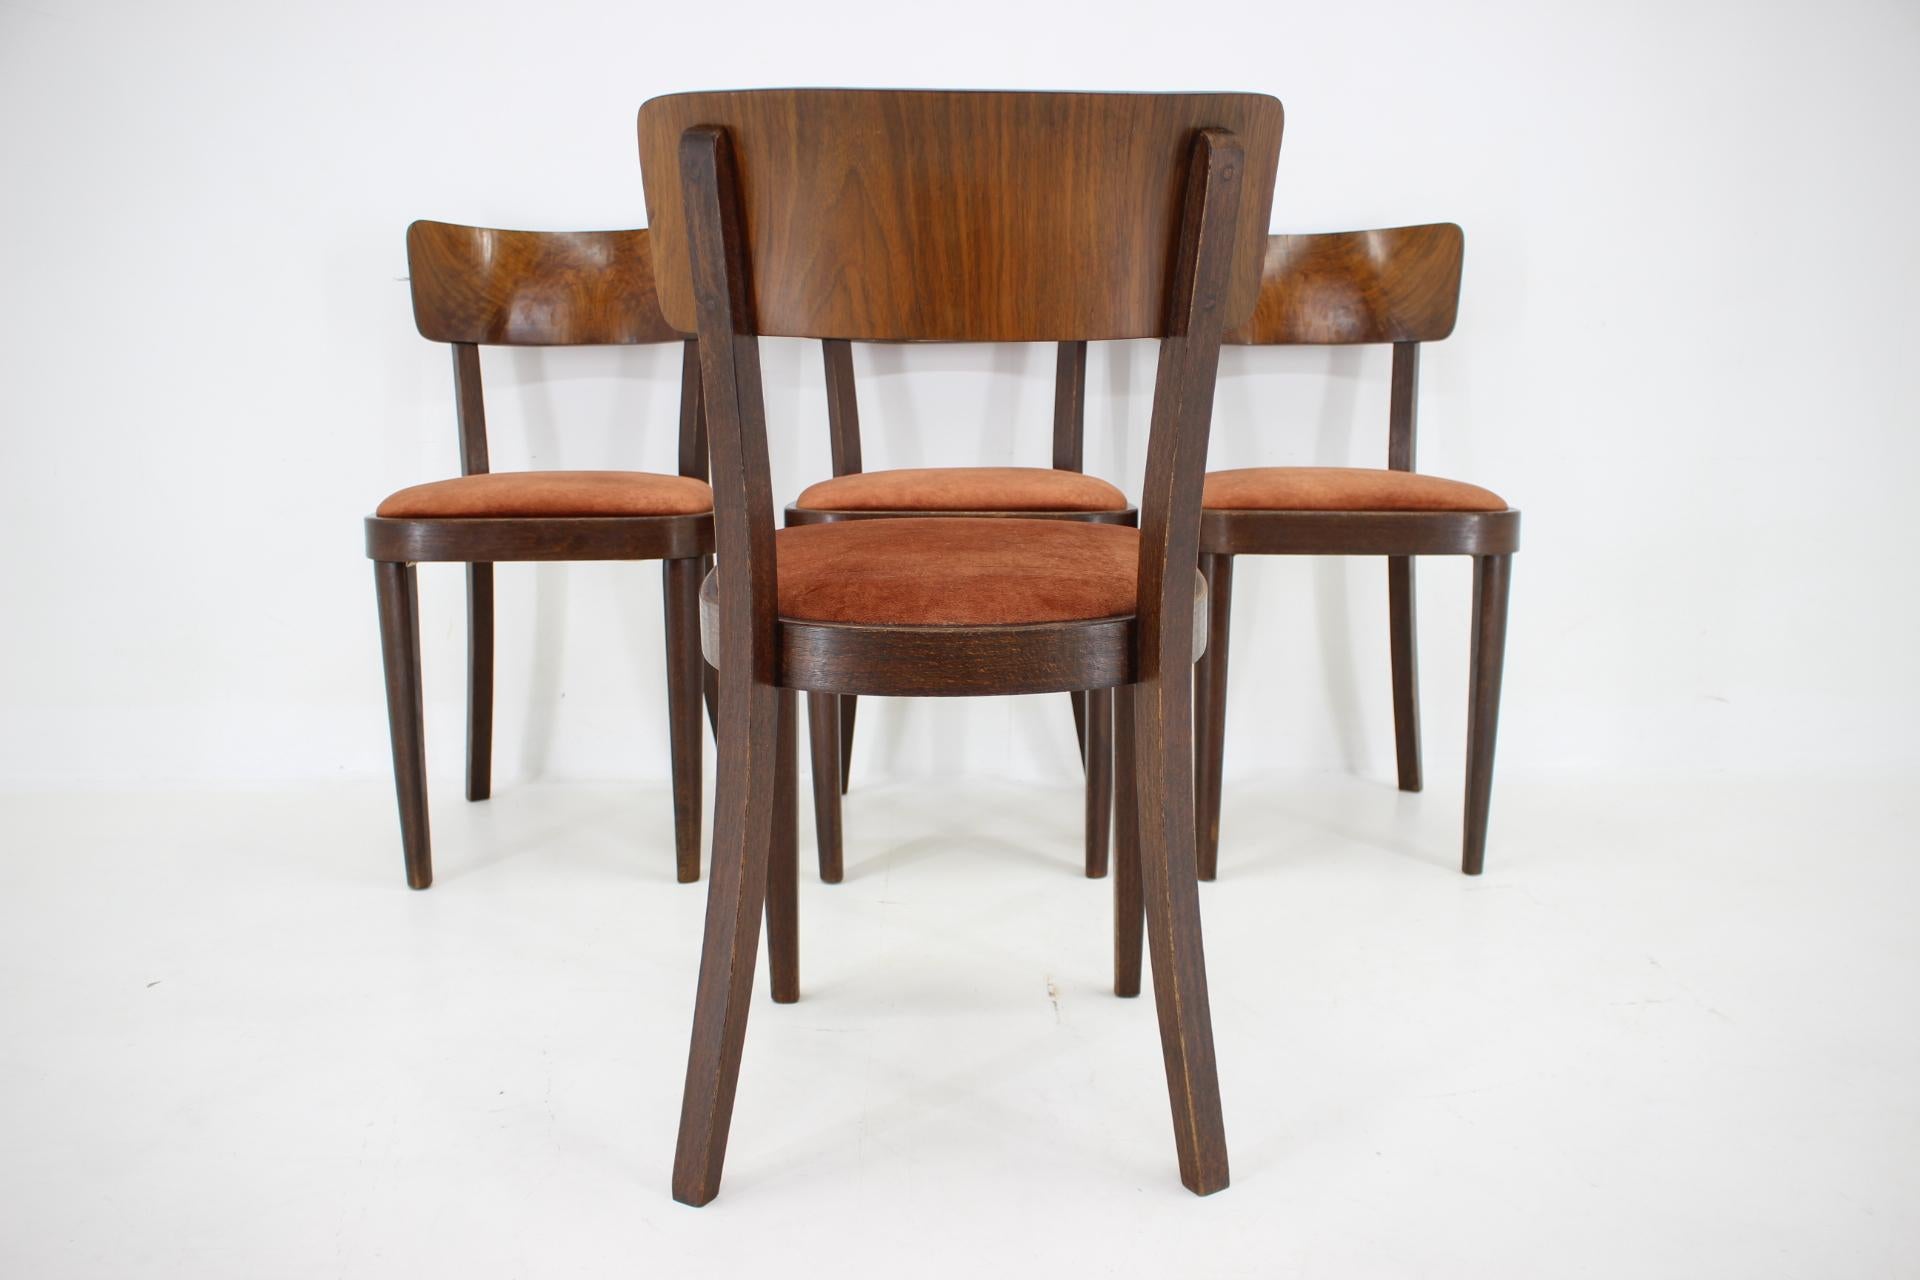 1940s Set of Four Dining Chairs, Czechoslovakia For Sale 1